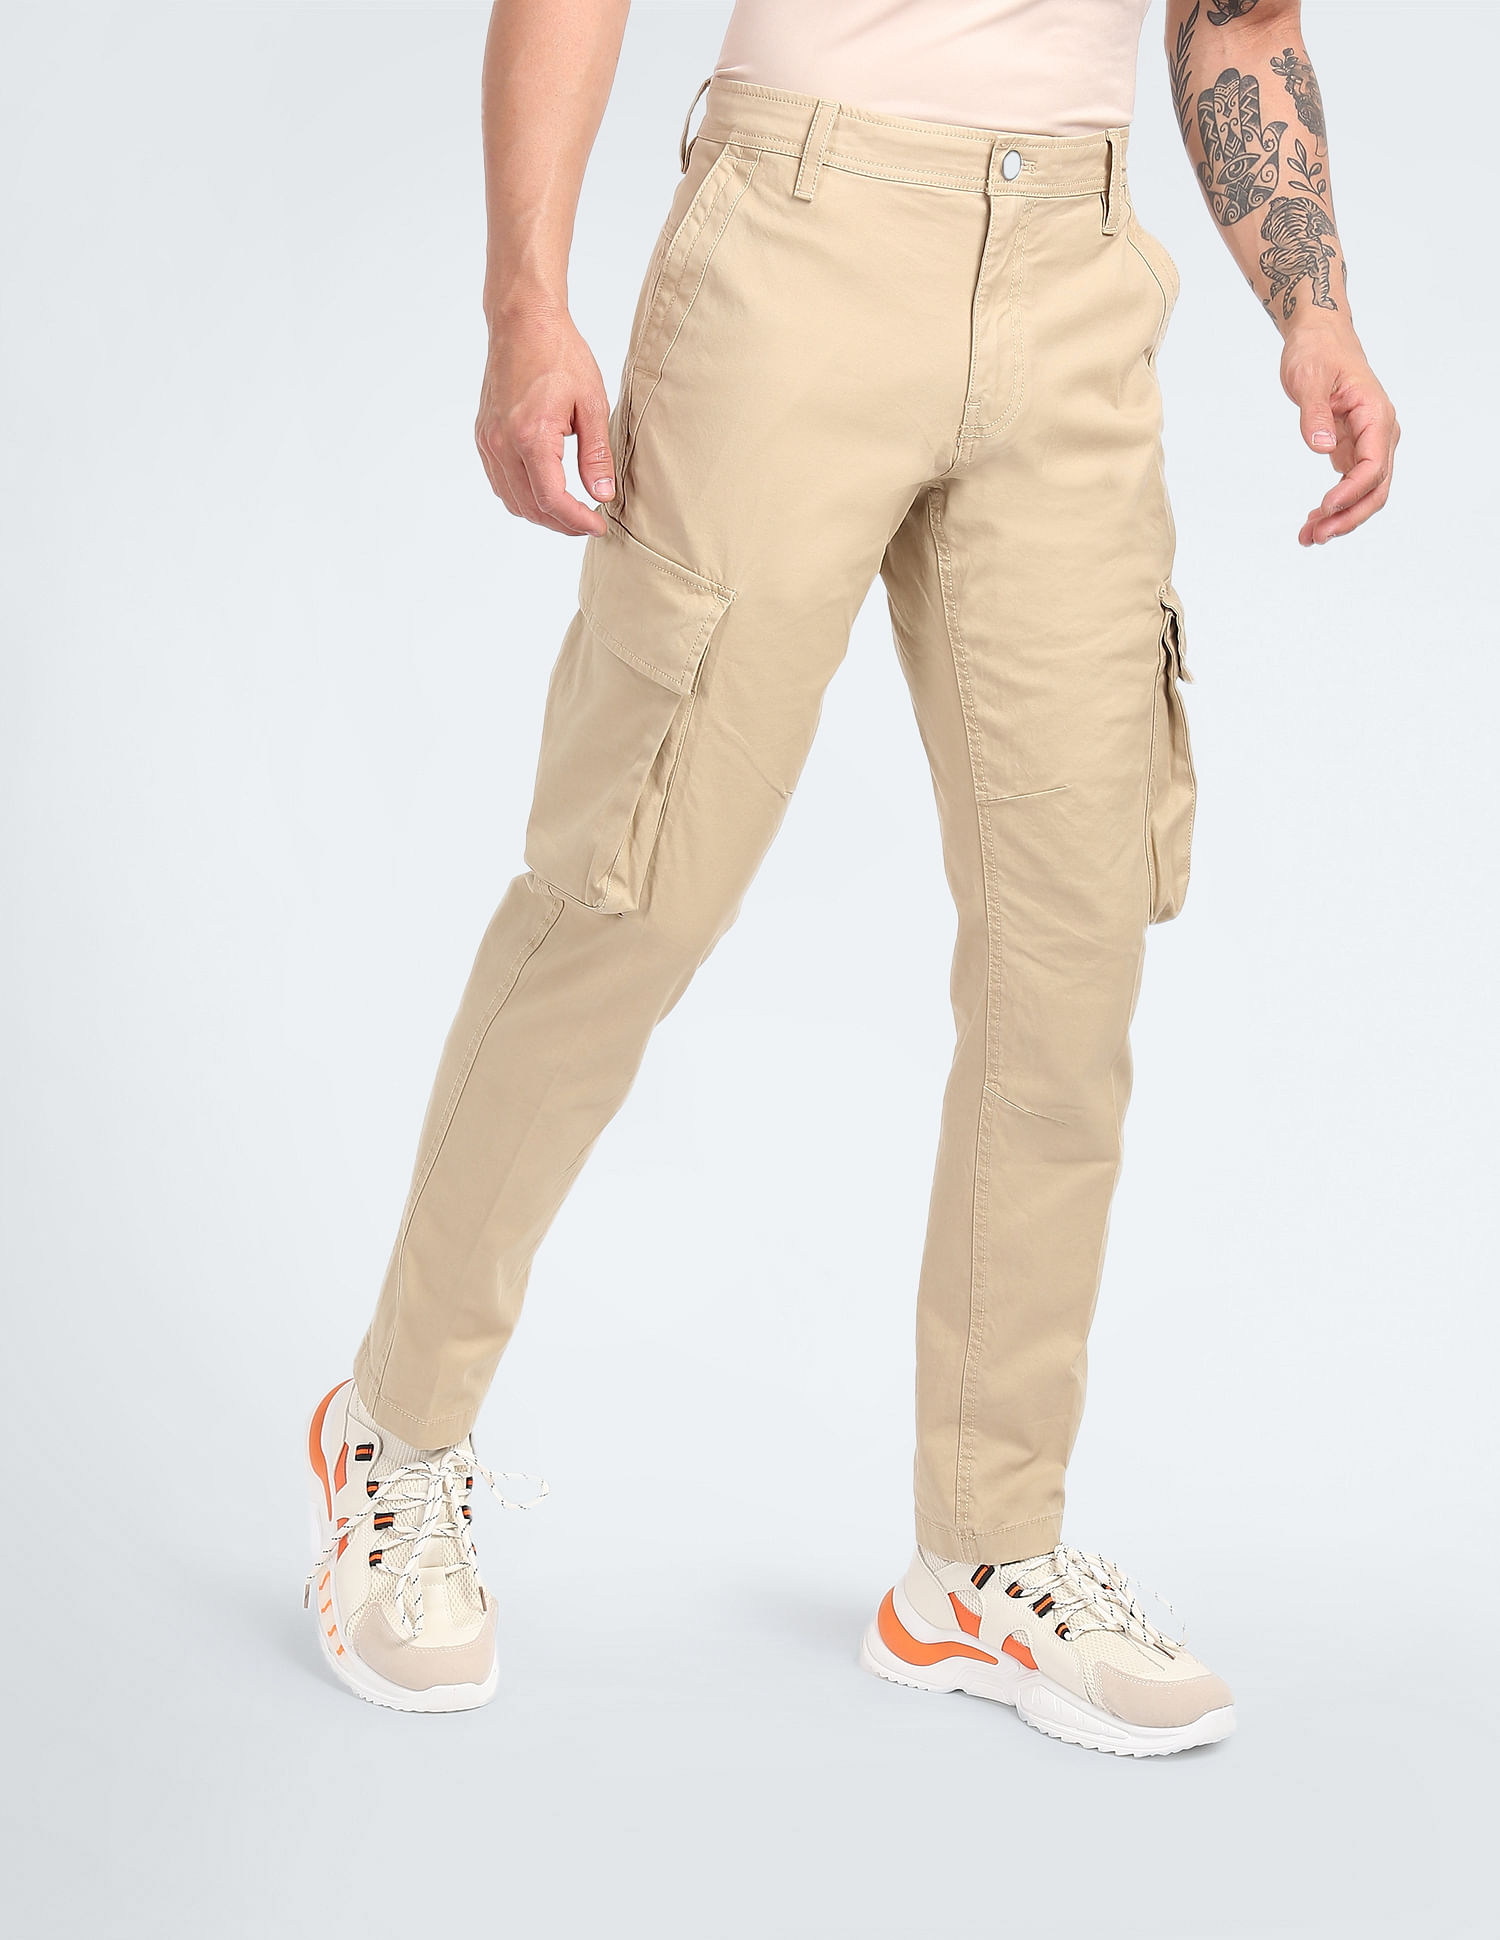 XTra Baggy Twill Homeboy Jeans in olive for Men  TITUS